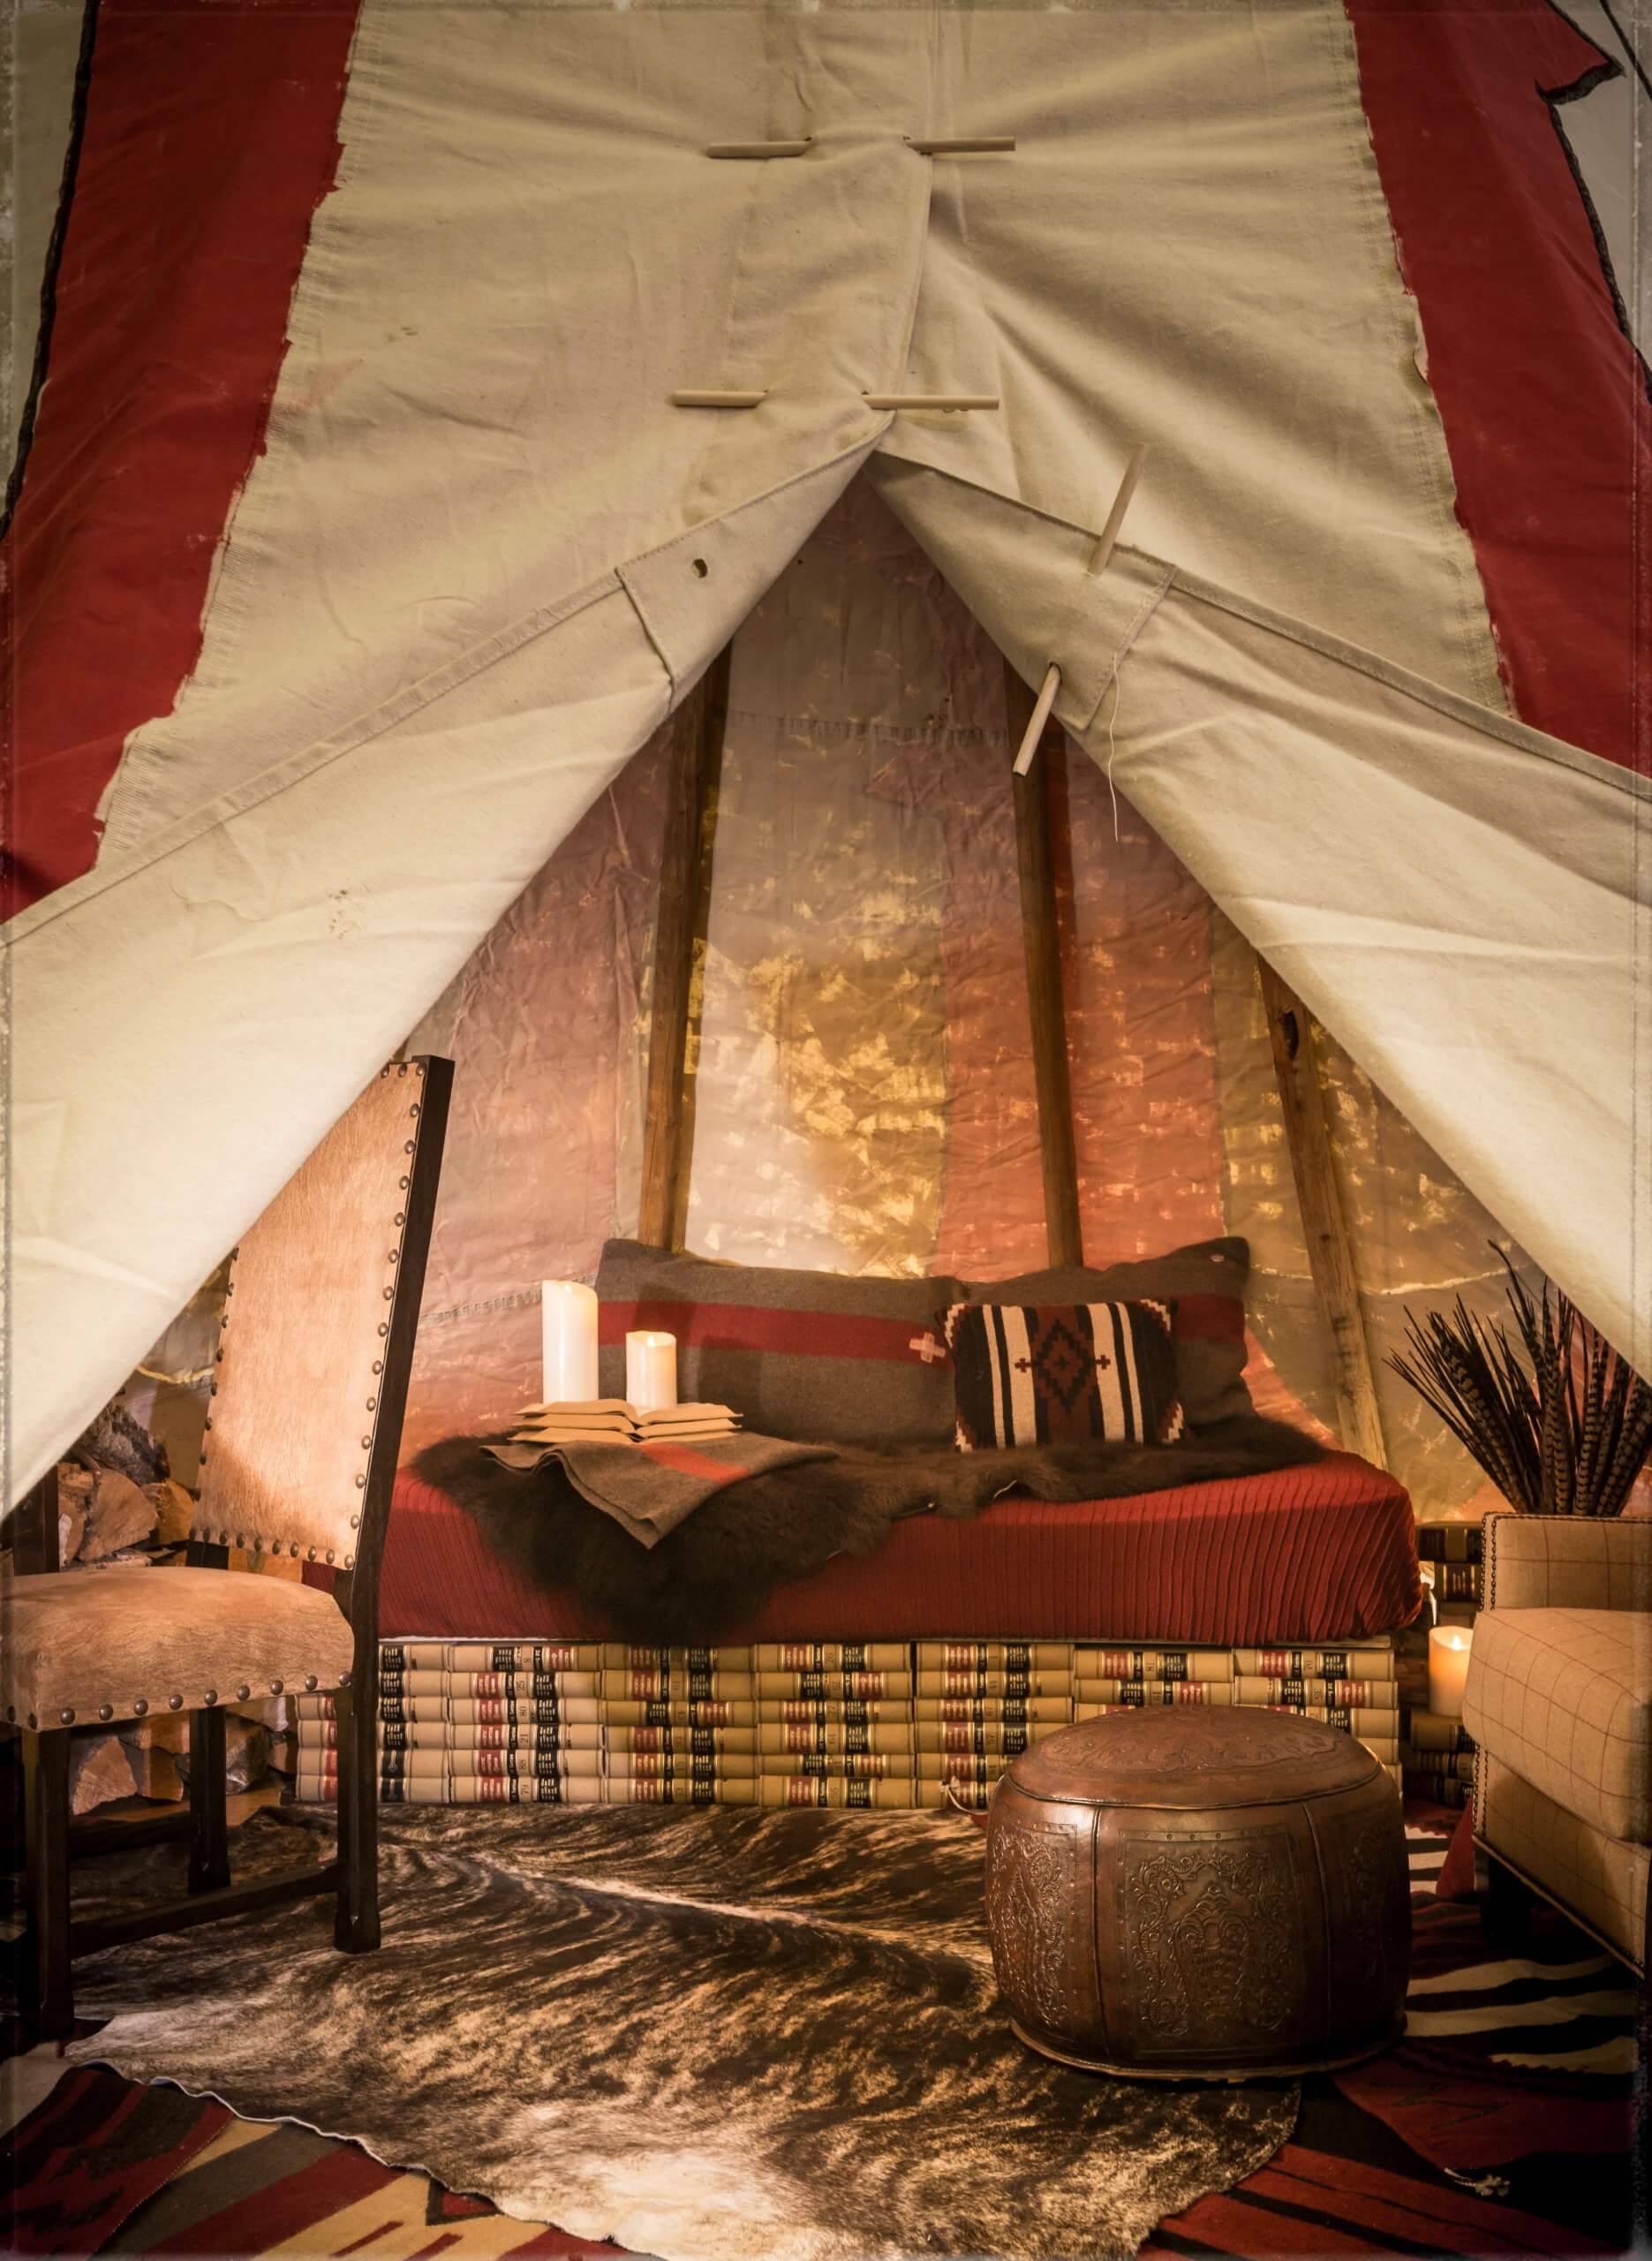 Interior of tipi with bed, chairs, cow hide rug, leather ottoman